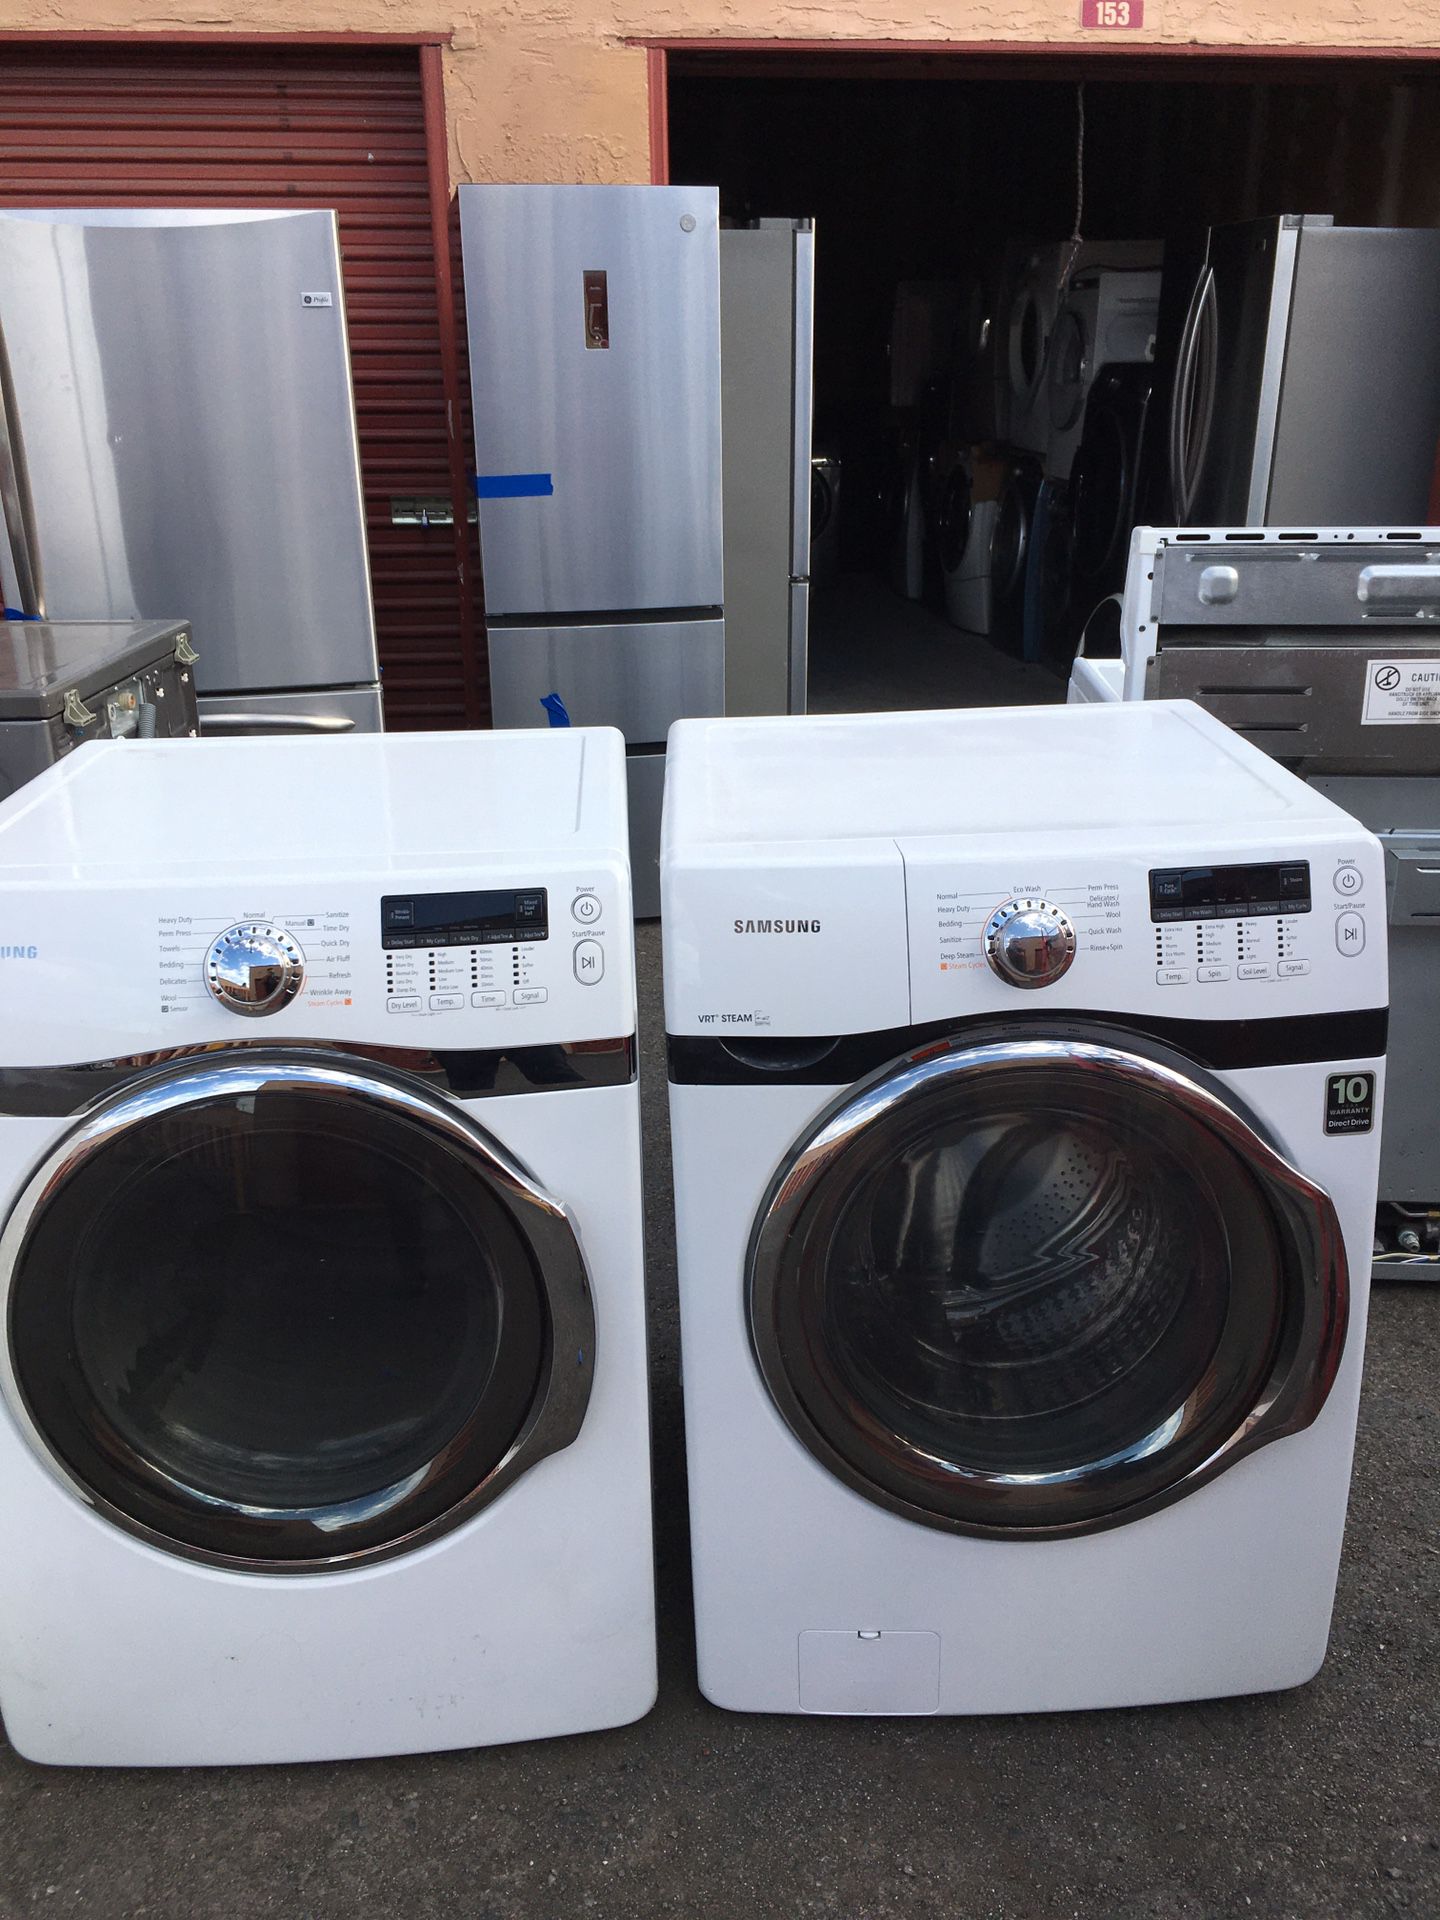 Samsung washer and electric ⚡️ dryer set